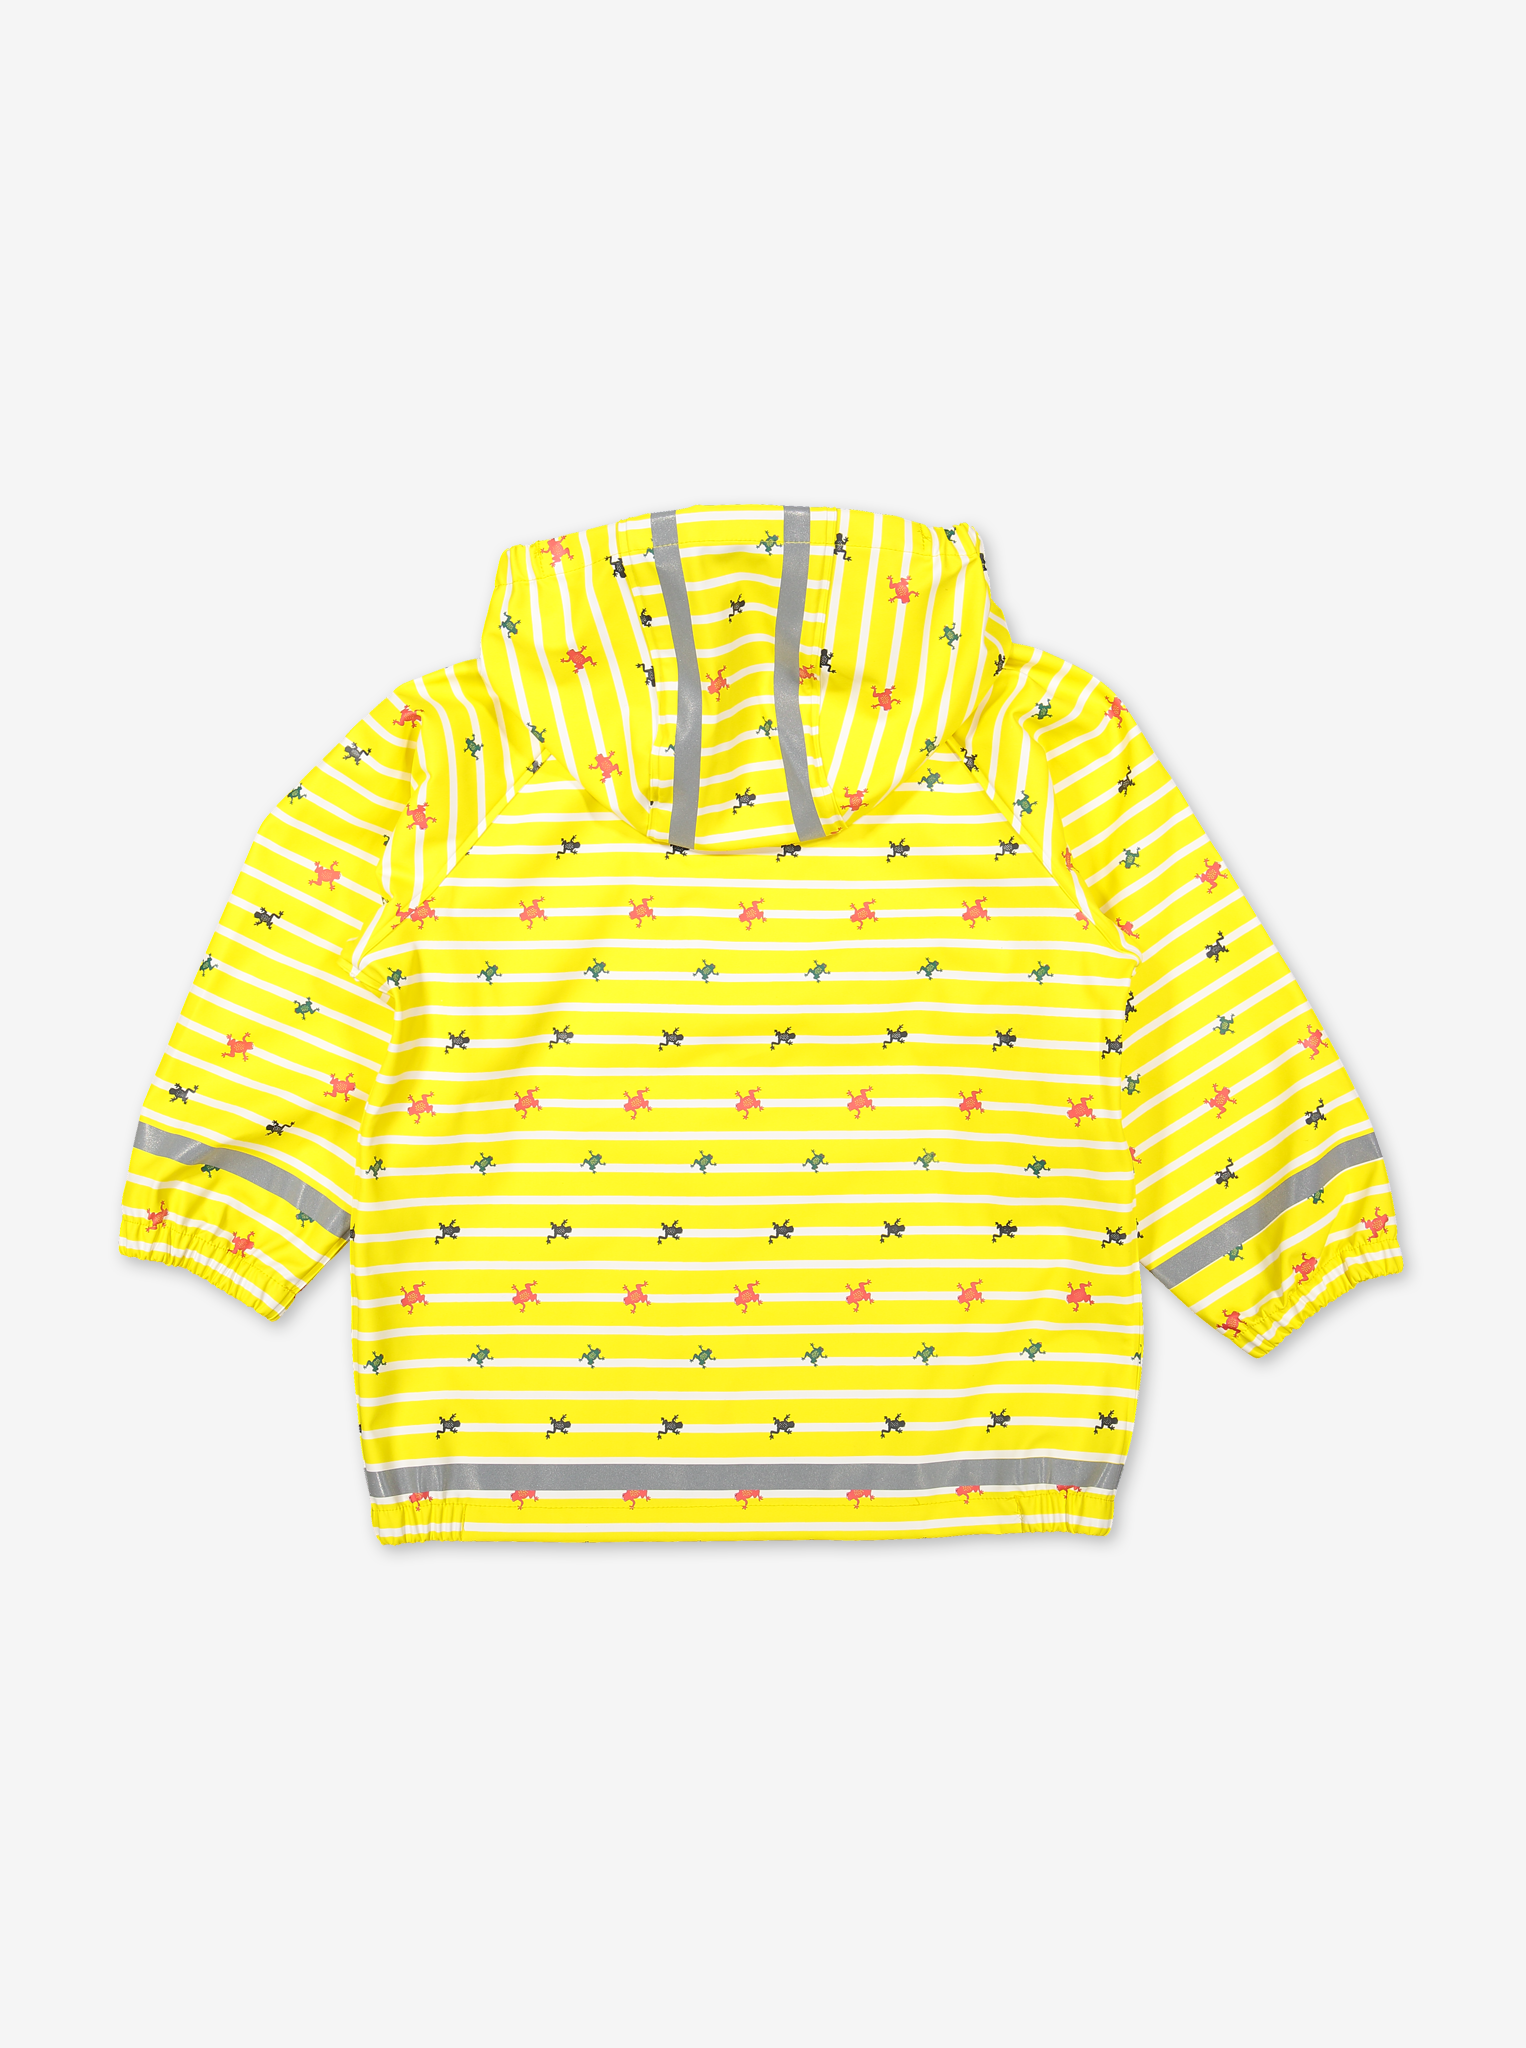 Back view of yellow raincoat for kids, made of polyester, with frog & stripes design, comes with a detachable hood.